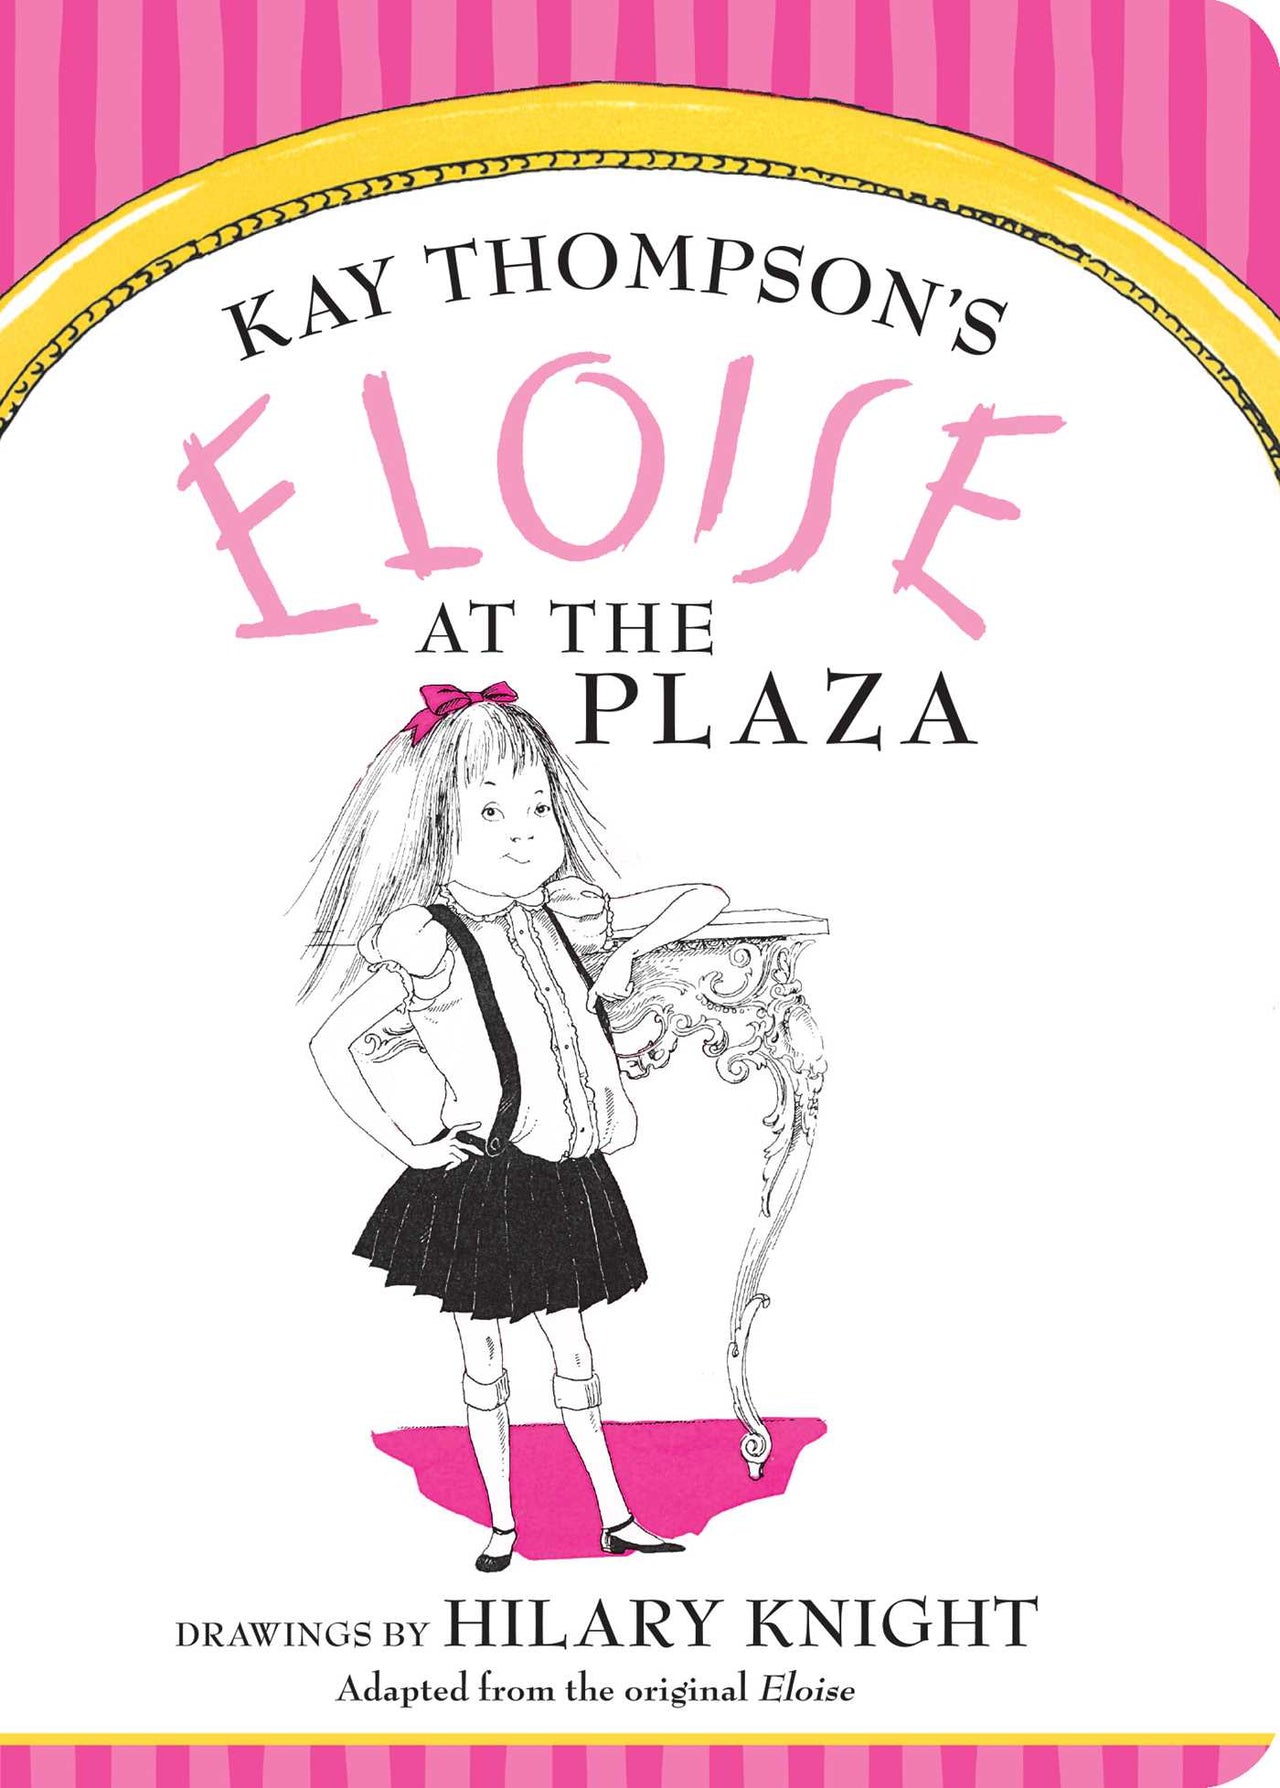 Simon & Schuster Eloise at The Plaza